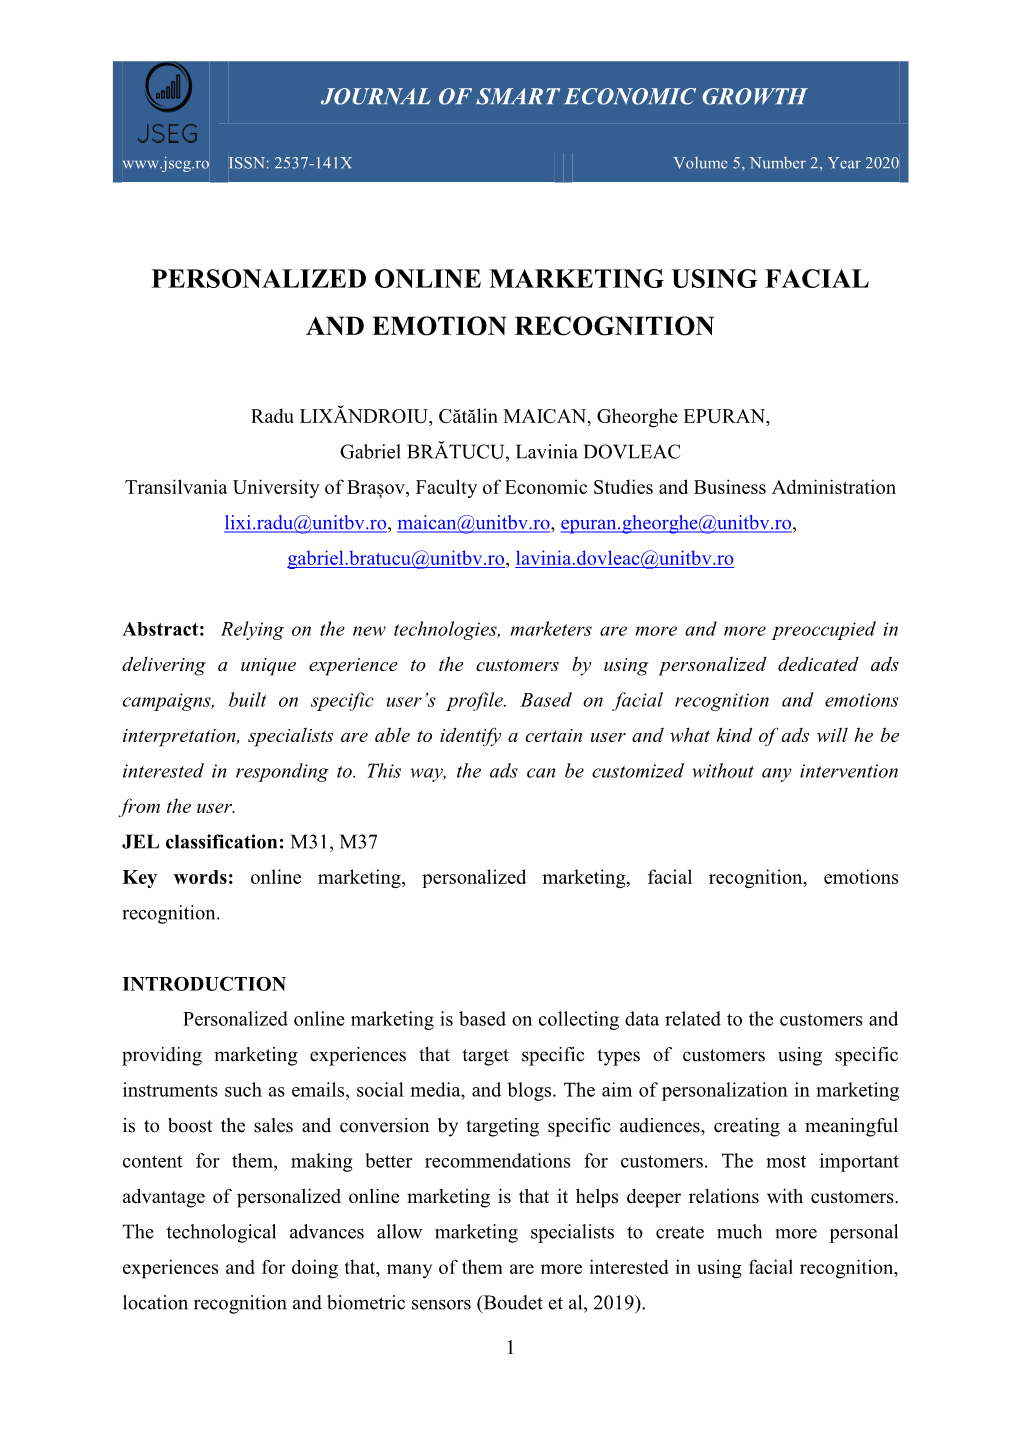 Personalized Online Marketing Using Facial and Emotion Recognition